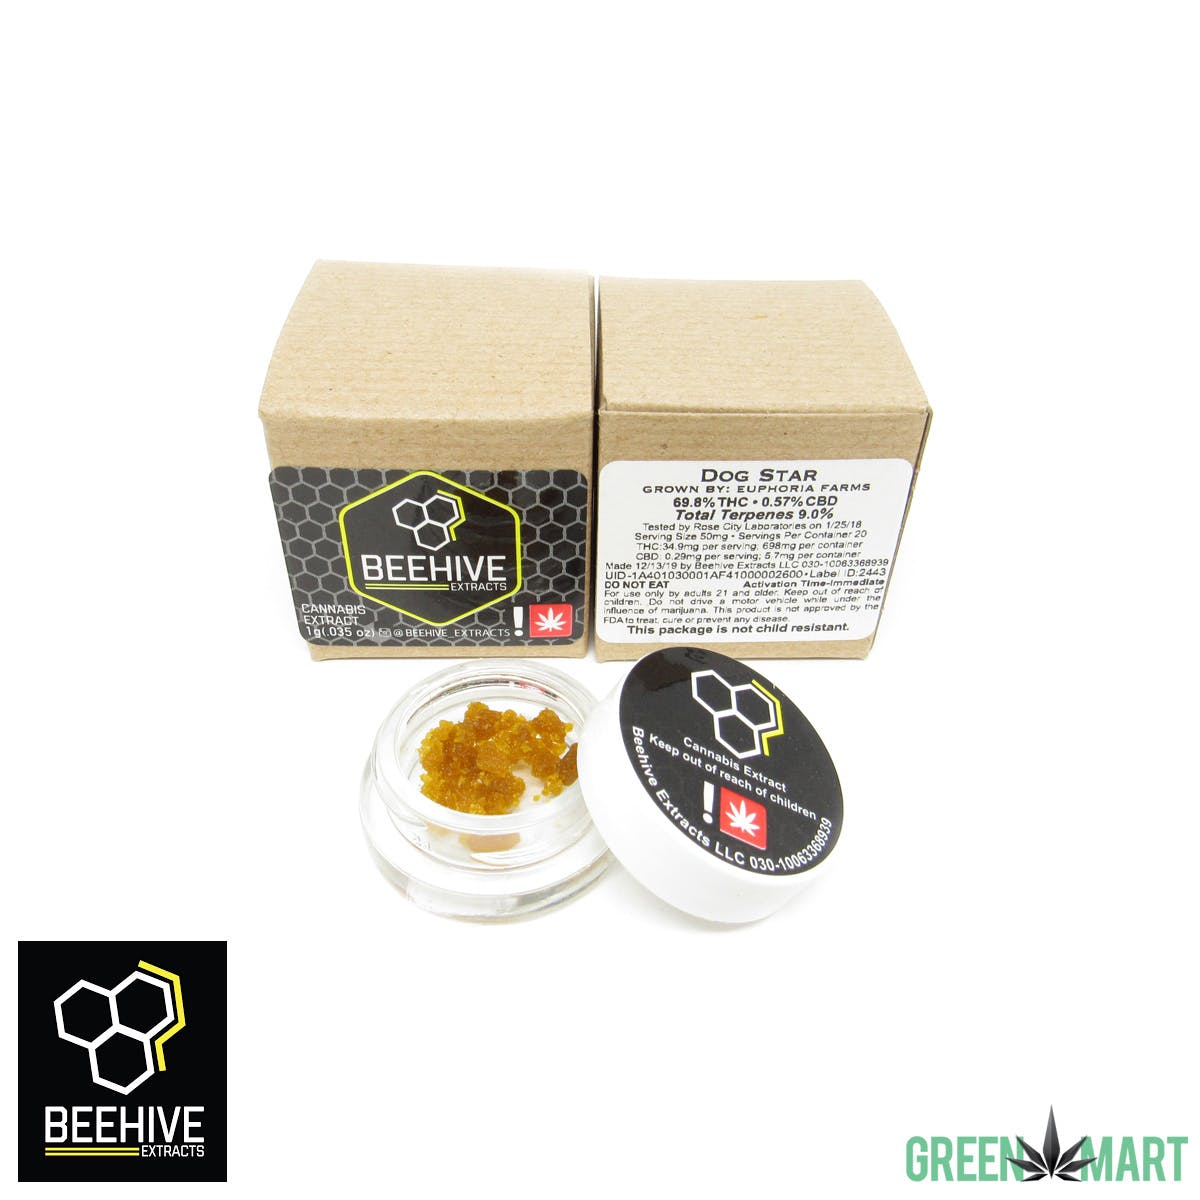 Bee Hive Extracts - Dog Star